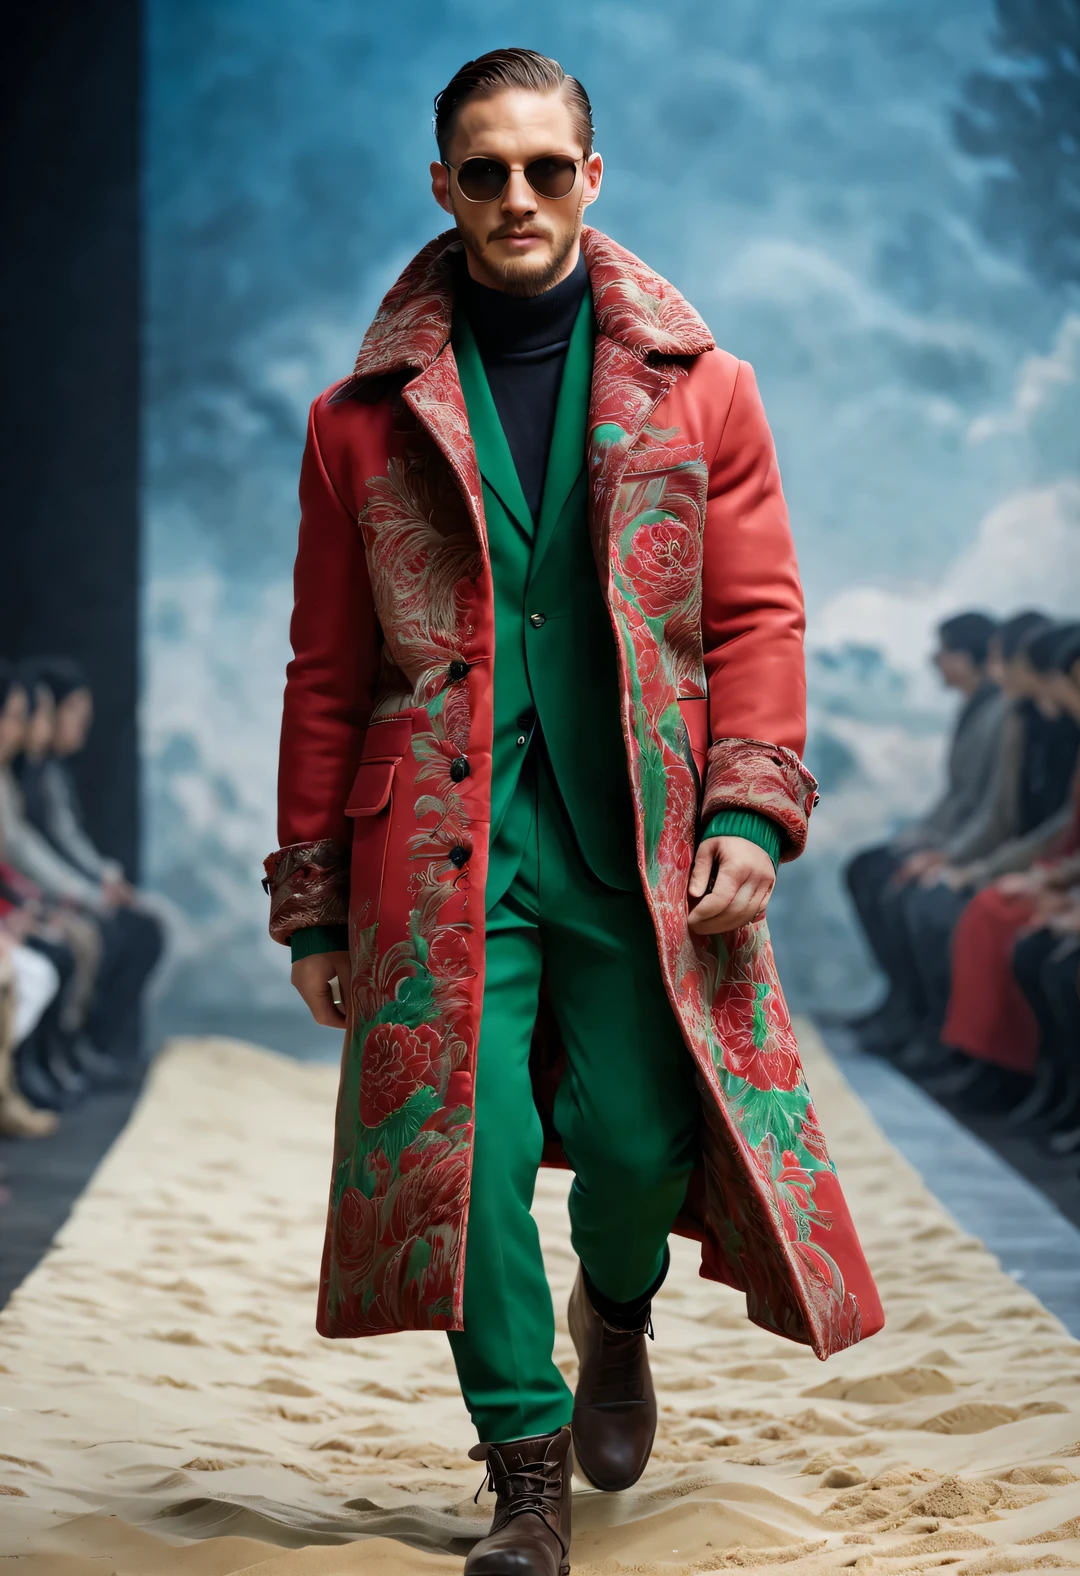 (Photo of a male model wearing a red and green peony couture cotton coat on the catwalk）,（China Red 2024 Winter man’s Fashion Show Live Photos），（whole body），
（man&#39;s winter extra long cotton coat design：1.0），（Tall, fit and handsome male model Tom.Hardy wears a cotton coat made of thick burlap with red and green peonies：1.34），Warm and windproof cotton coat，peonies and birds，Leaves，Embroidery Su embroidery red and green peonies and birds，interwoven patterns as themes，Brown fur coat collar，complex patterns，A modern interpretation of Tibetan totems，Learn from the rich cultural heritage and exquisite craftsmanship of the Northeast region，Reinterpret traditional clothing with modern charm，
parka，(exceed)coat，sweater，winter scarf warm scarf，gloves gloves，belt，boots，sunglasses，
background with：In the room，The stage is stepped with fine sand，（Tom Hardy）， (((runway scene))),The stage is cexceeded with fine sand，jupiter，reef，Sand and foam, dusty，Blue swirls swirl like bubbles, The landscape must be filled with swirls and dynamic colored smoke，Paired with Ballerina Smoky Swirl Dress.Flowing purple smoky skirts and quick twirling moves were a source of inspiration, Key Elements::convey a sense of mystery, smoky，Colorful atmosphere.Emphasis on dynamics, Rotational motion ray tracing in compositing, divinelight, ultra high definition, Masterpiece of anatomy，It can give texture to the skin, Super details, high detail, high quality, Award-winning, best quality, high resolution, 8k，Cat steps scene，Shoot from the bottom up，Search in ultra high definition format, masterpiece, charming eyes，anatomically correct, textured skin, Super details, Award-winning, best quality, 8K vision, Cat steps, current, fantasy art，